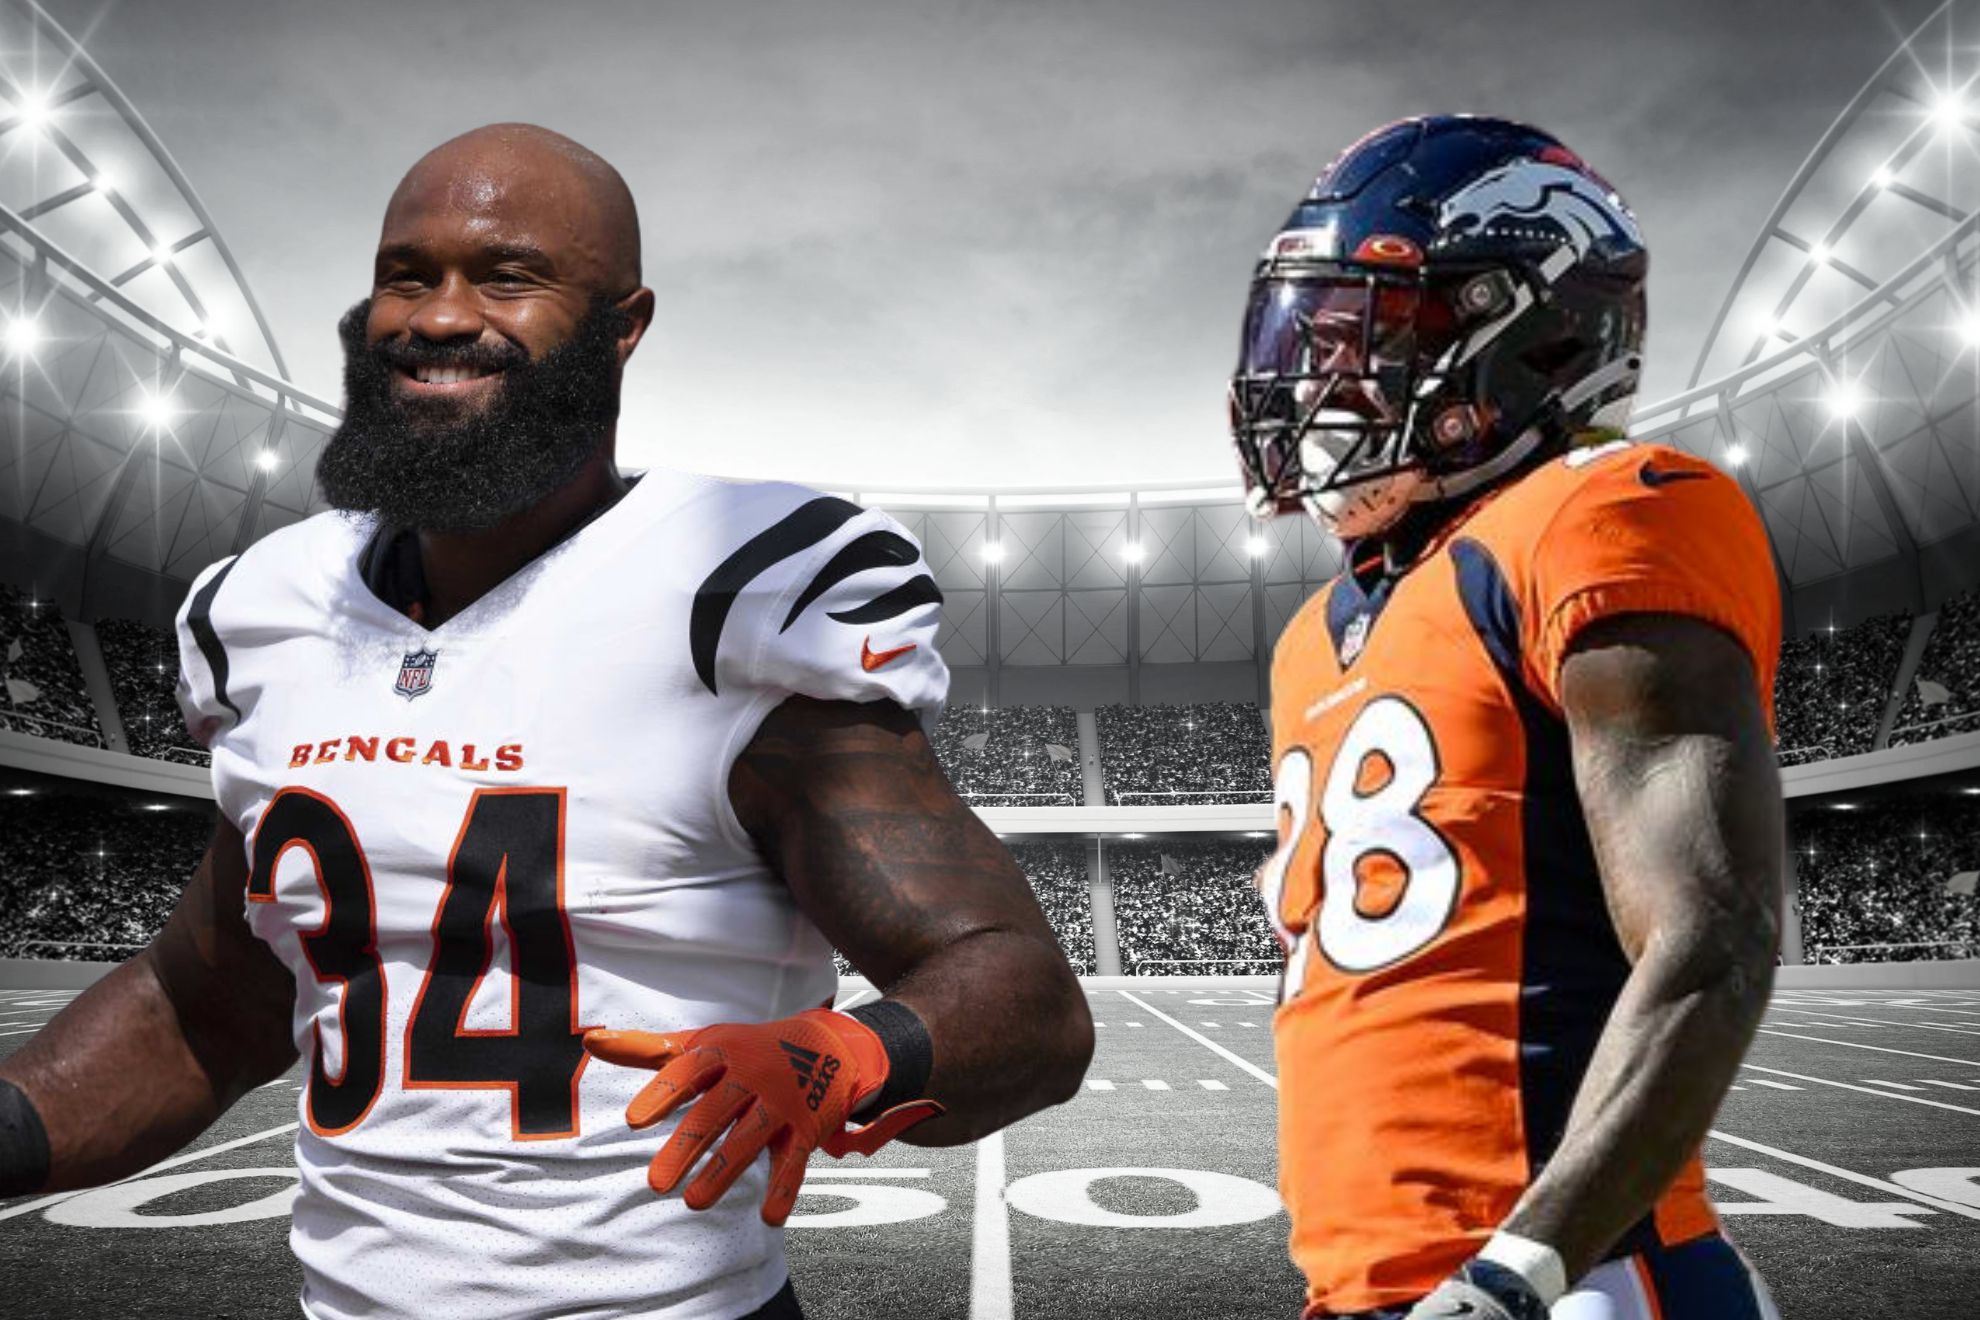 Samaje Perine (RB - Bengals) and Latavius Murray (RB - Broncos) are Week 12's top Fantasy Football pickups.